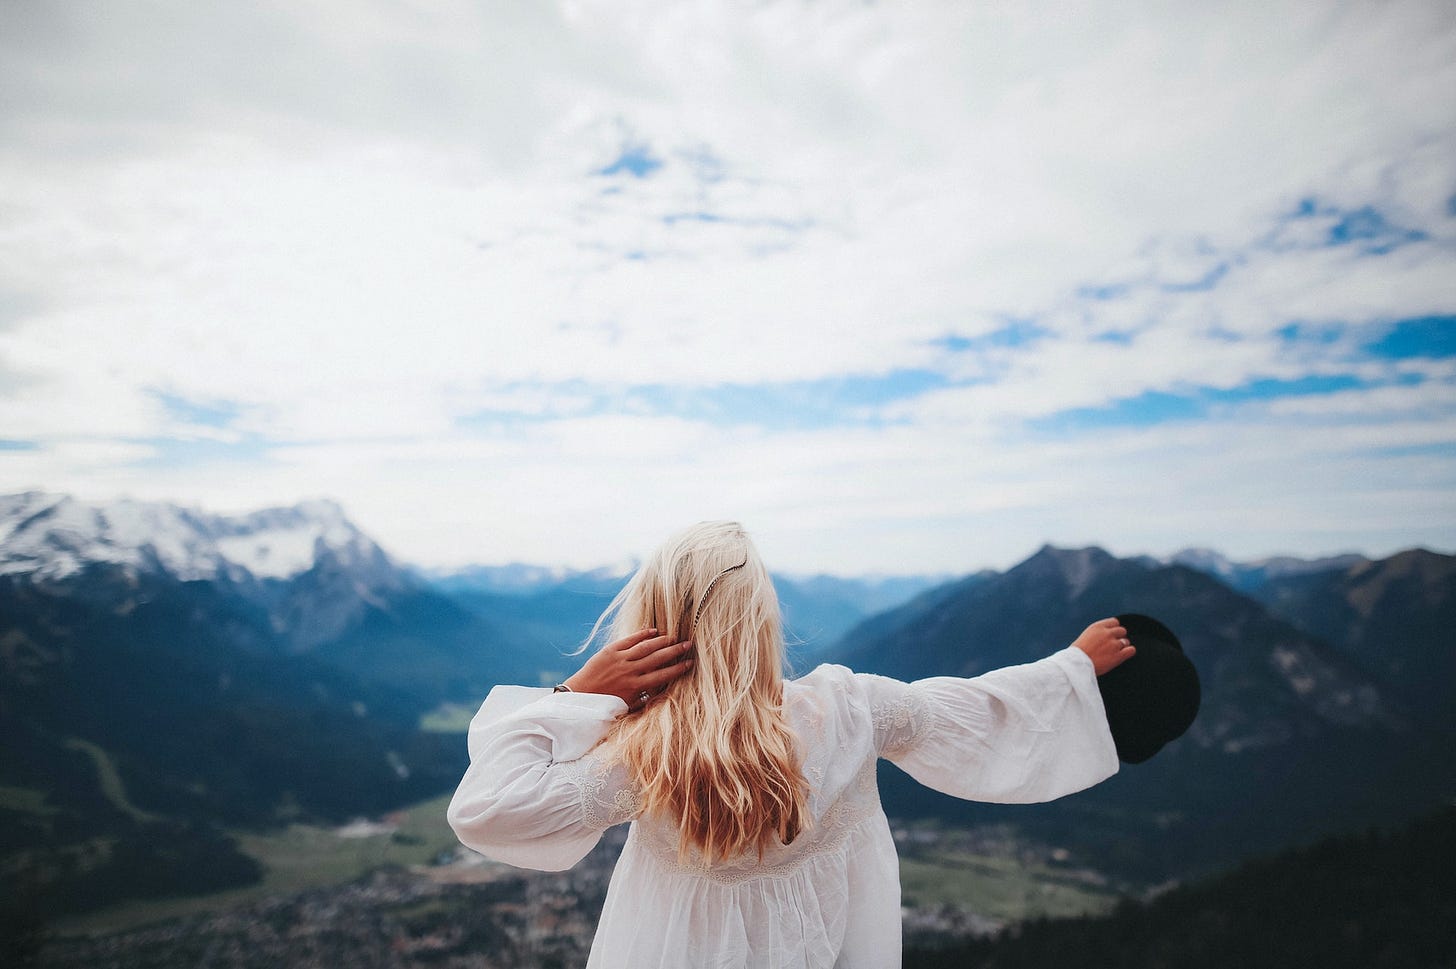 Back view of woman with white dress on mountain top view